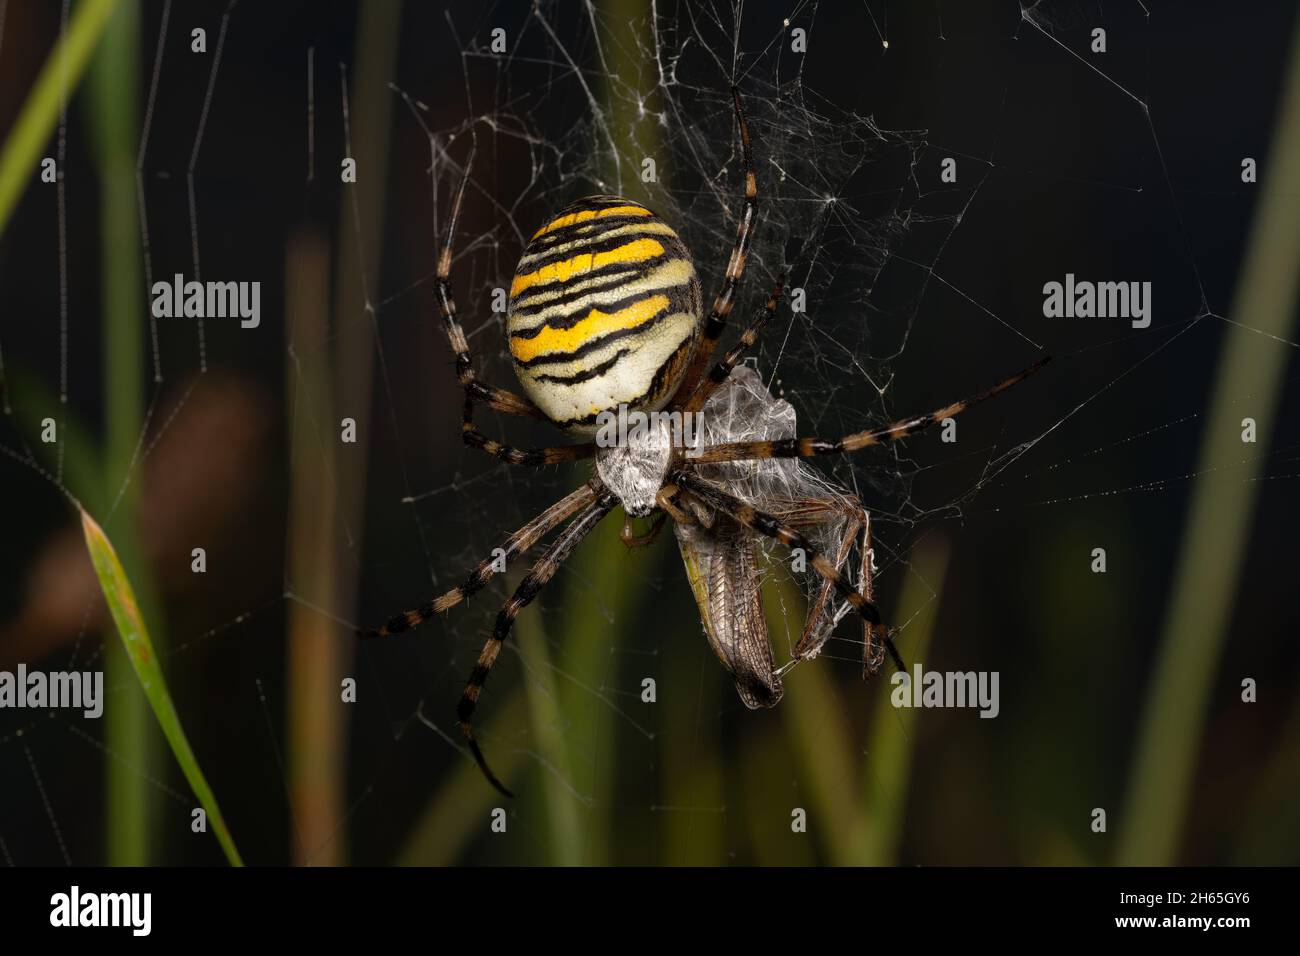 Selective focus shot of a Argiope spider Stock Photo